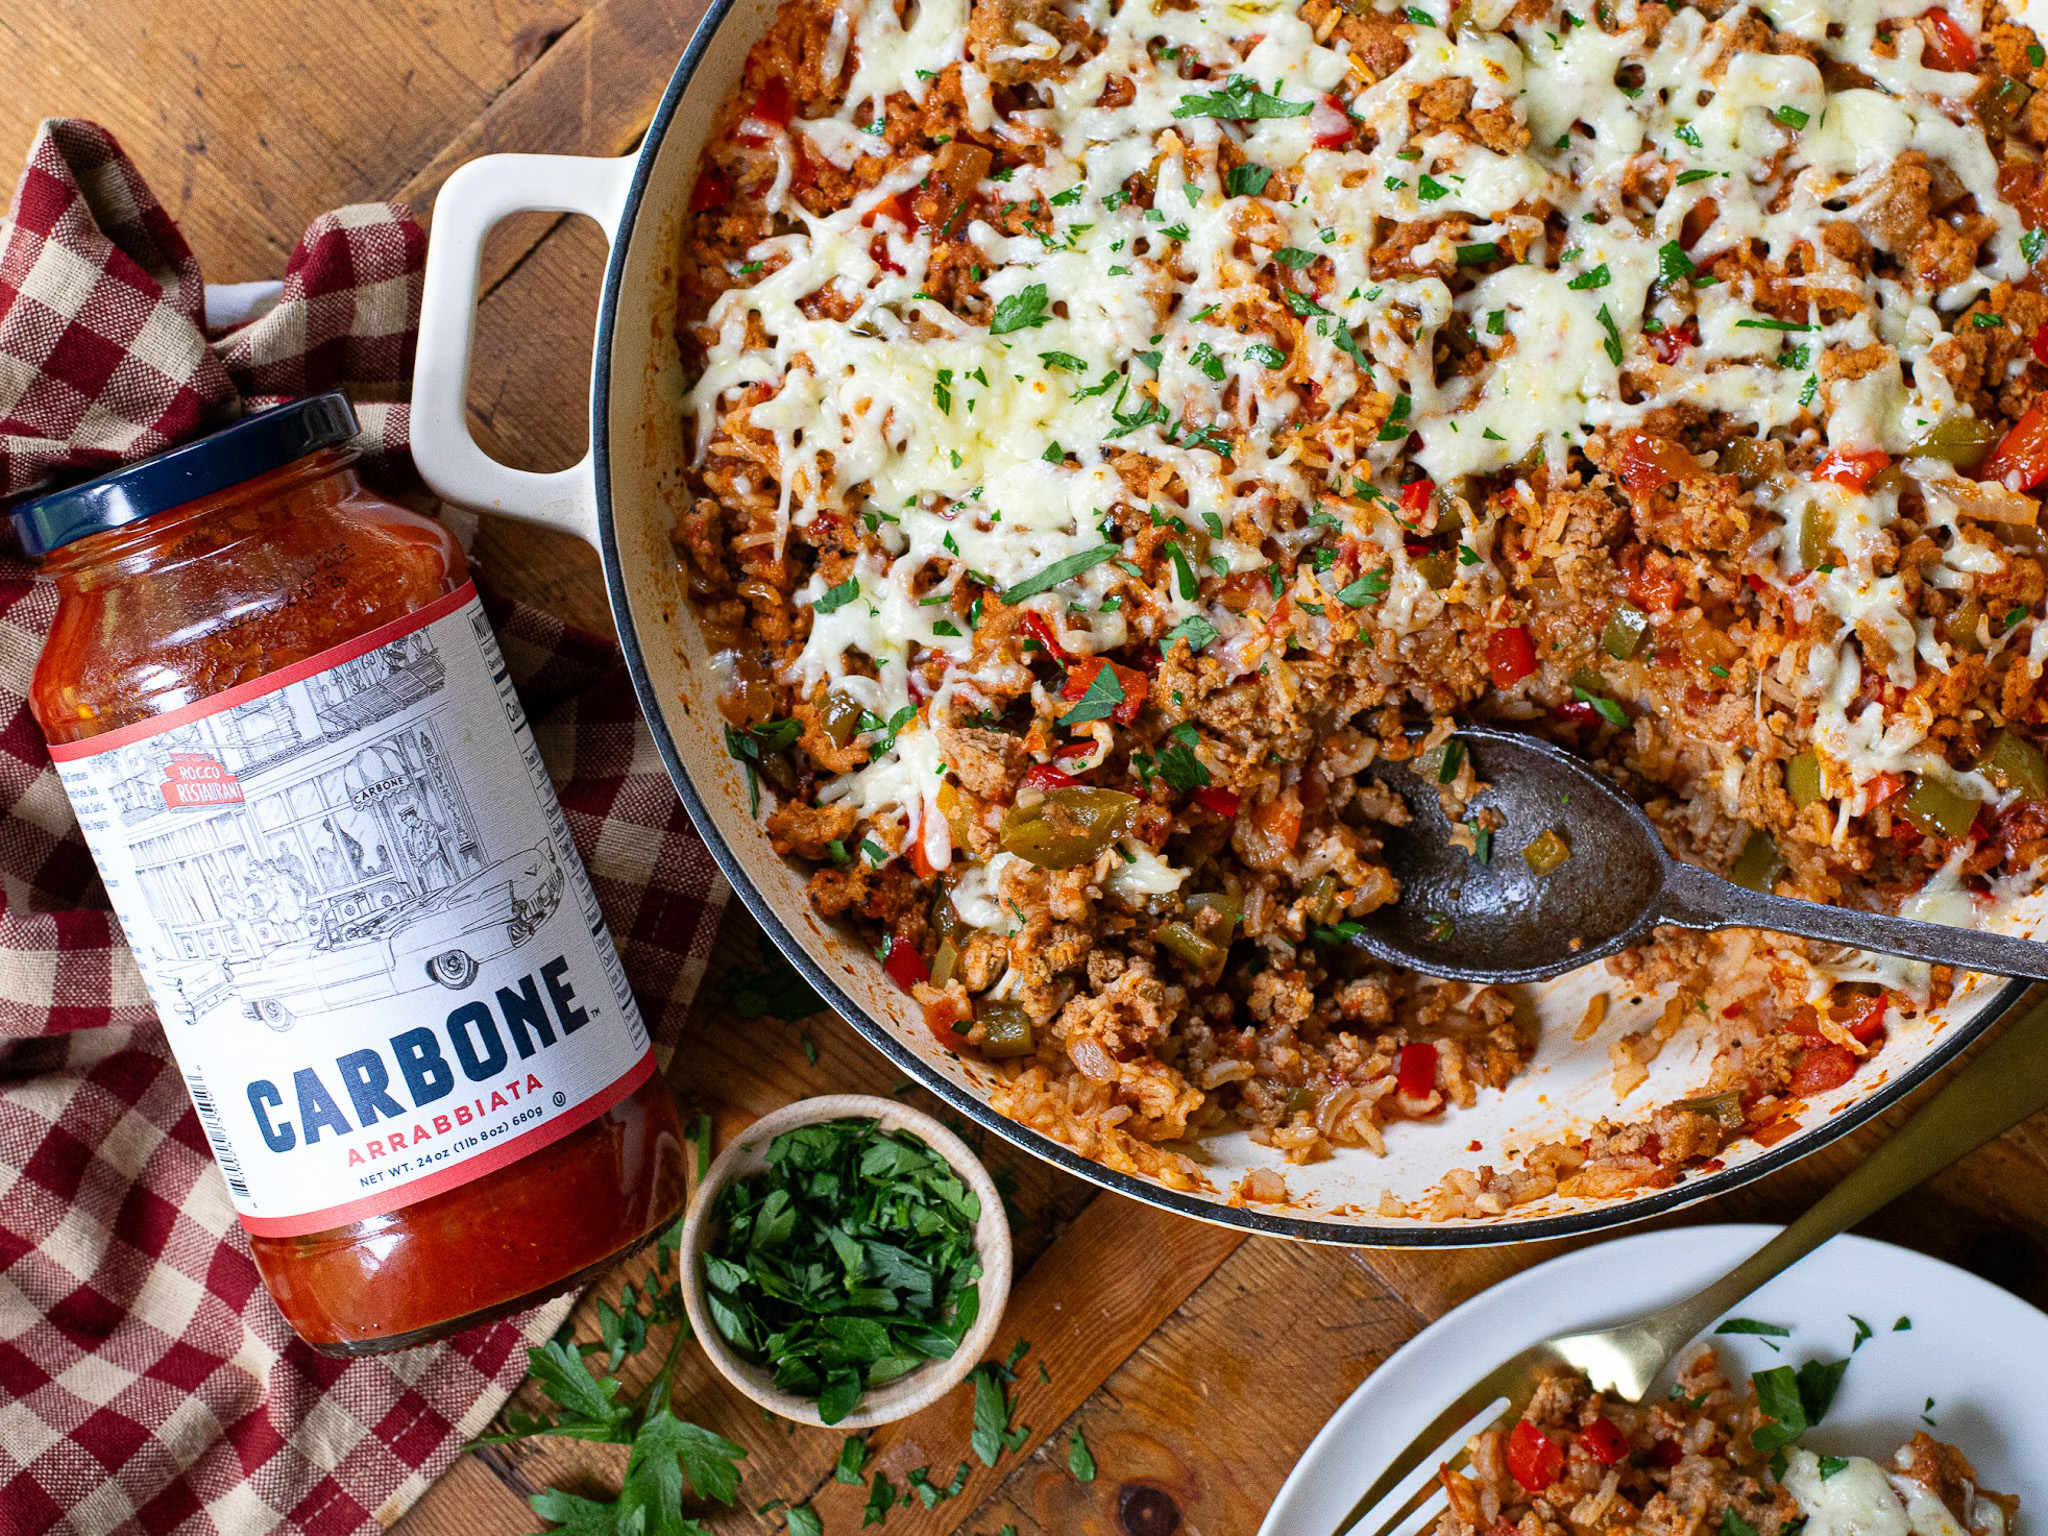 Carbone Sauce Is BOGO At Publix – Perfect Ingredient For My Bell Pepper Skillet Casserole